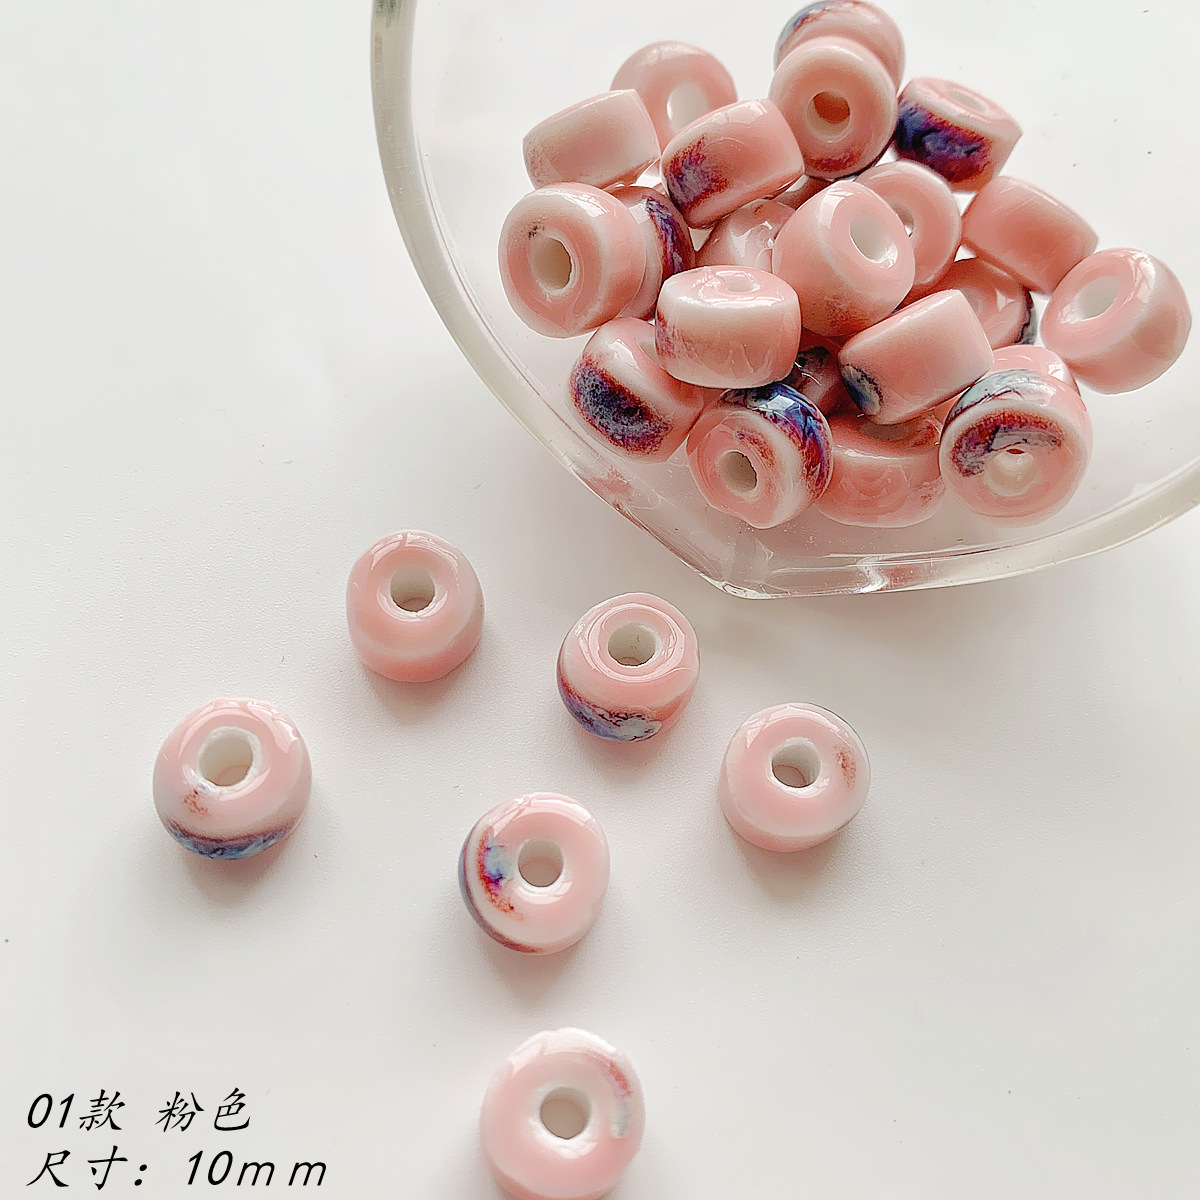 Ceramic High Temperature Flower Glaze Ring Cylinder Spacer Beads Beaded DIY Handmade Necklace Bracelet Mobile Phone Charm Material Accessories